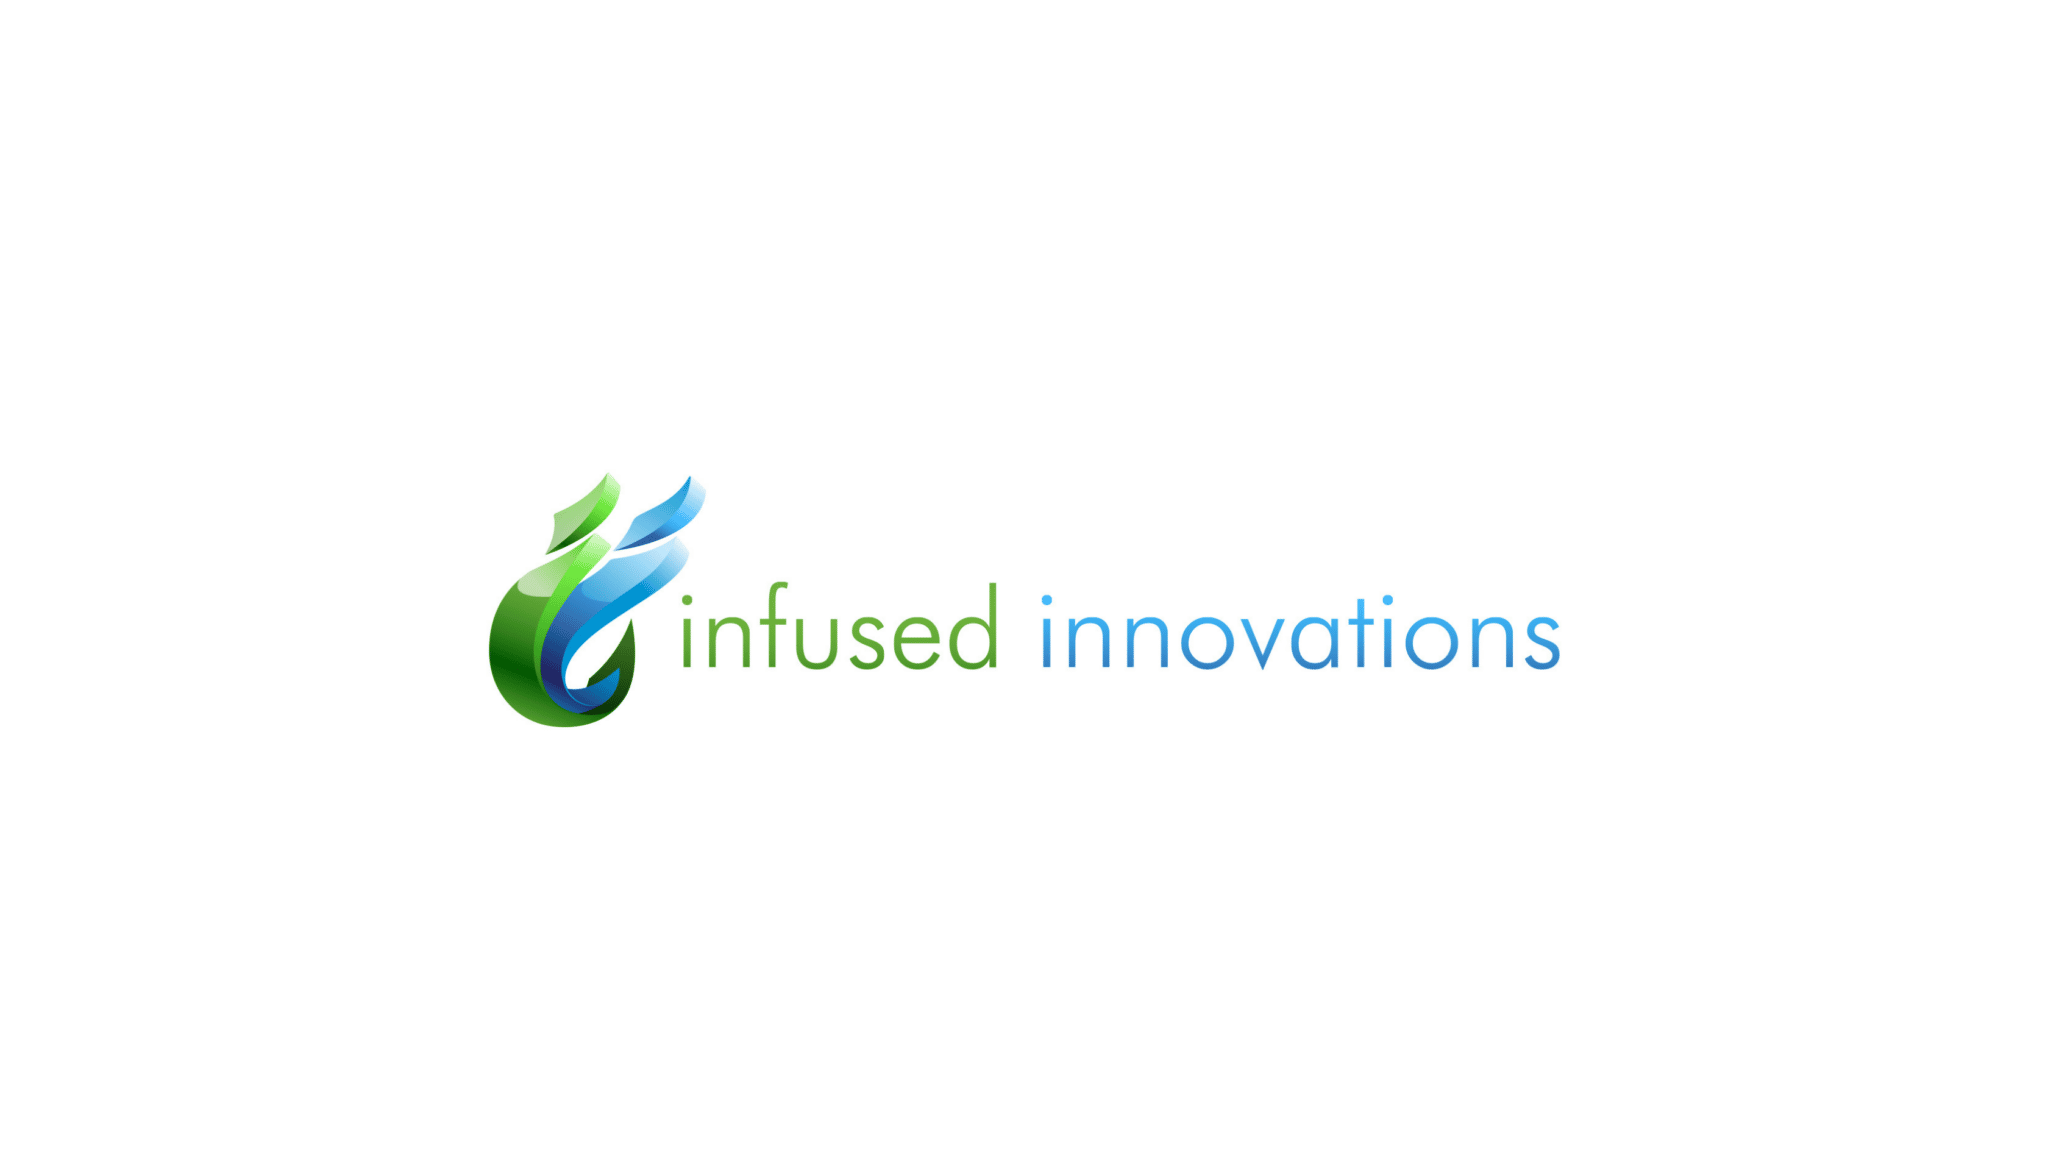 A Brief History of Infused Innovations 13